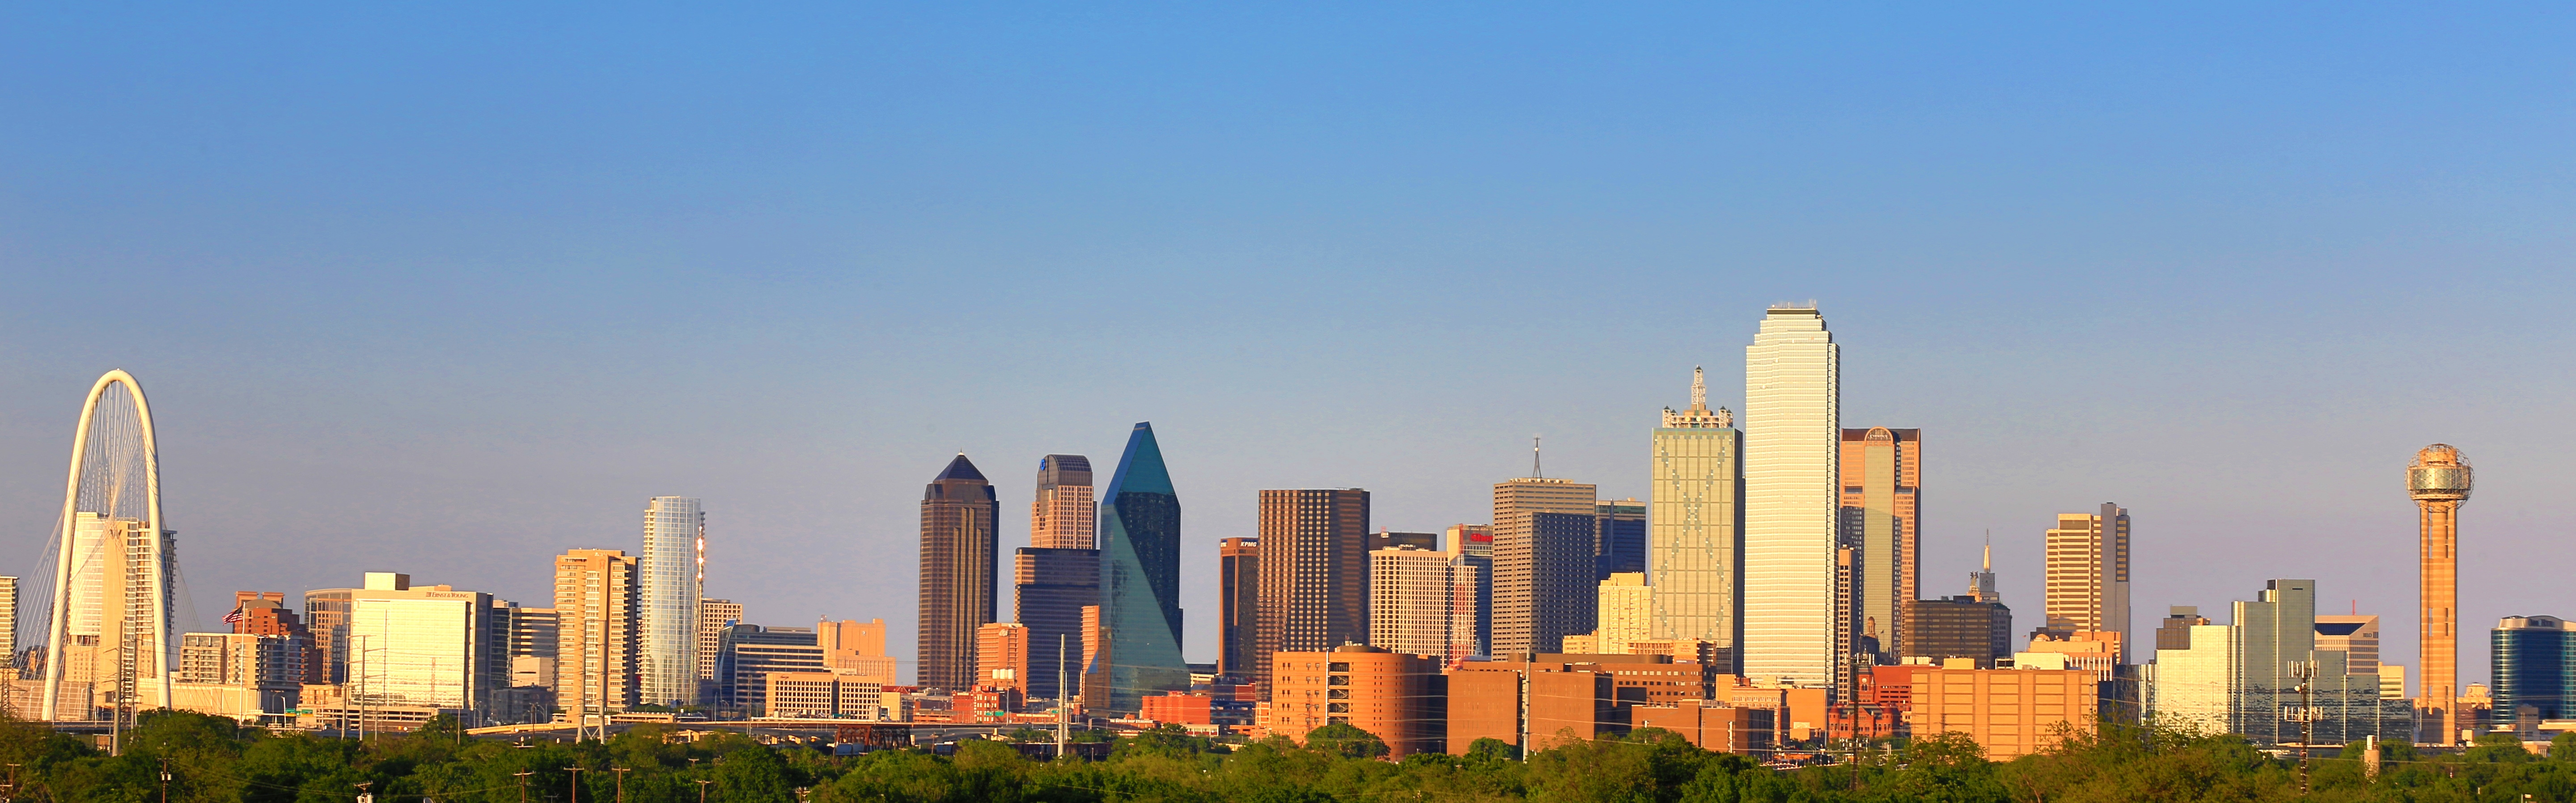 Nice wallpapers Dallas 5760x1795px